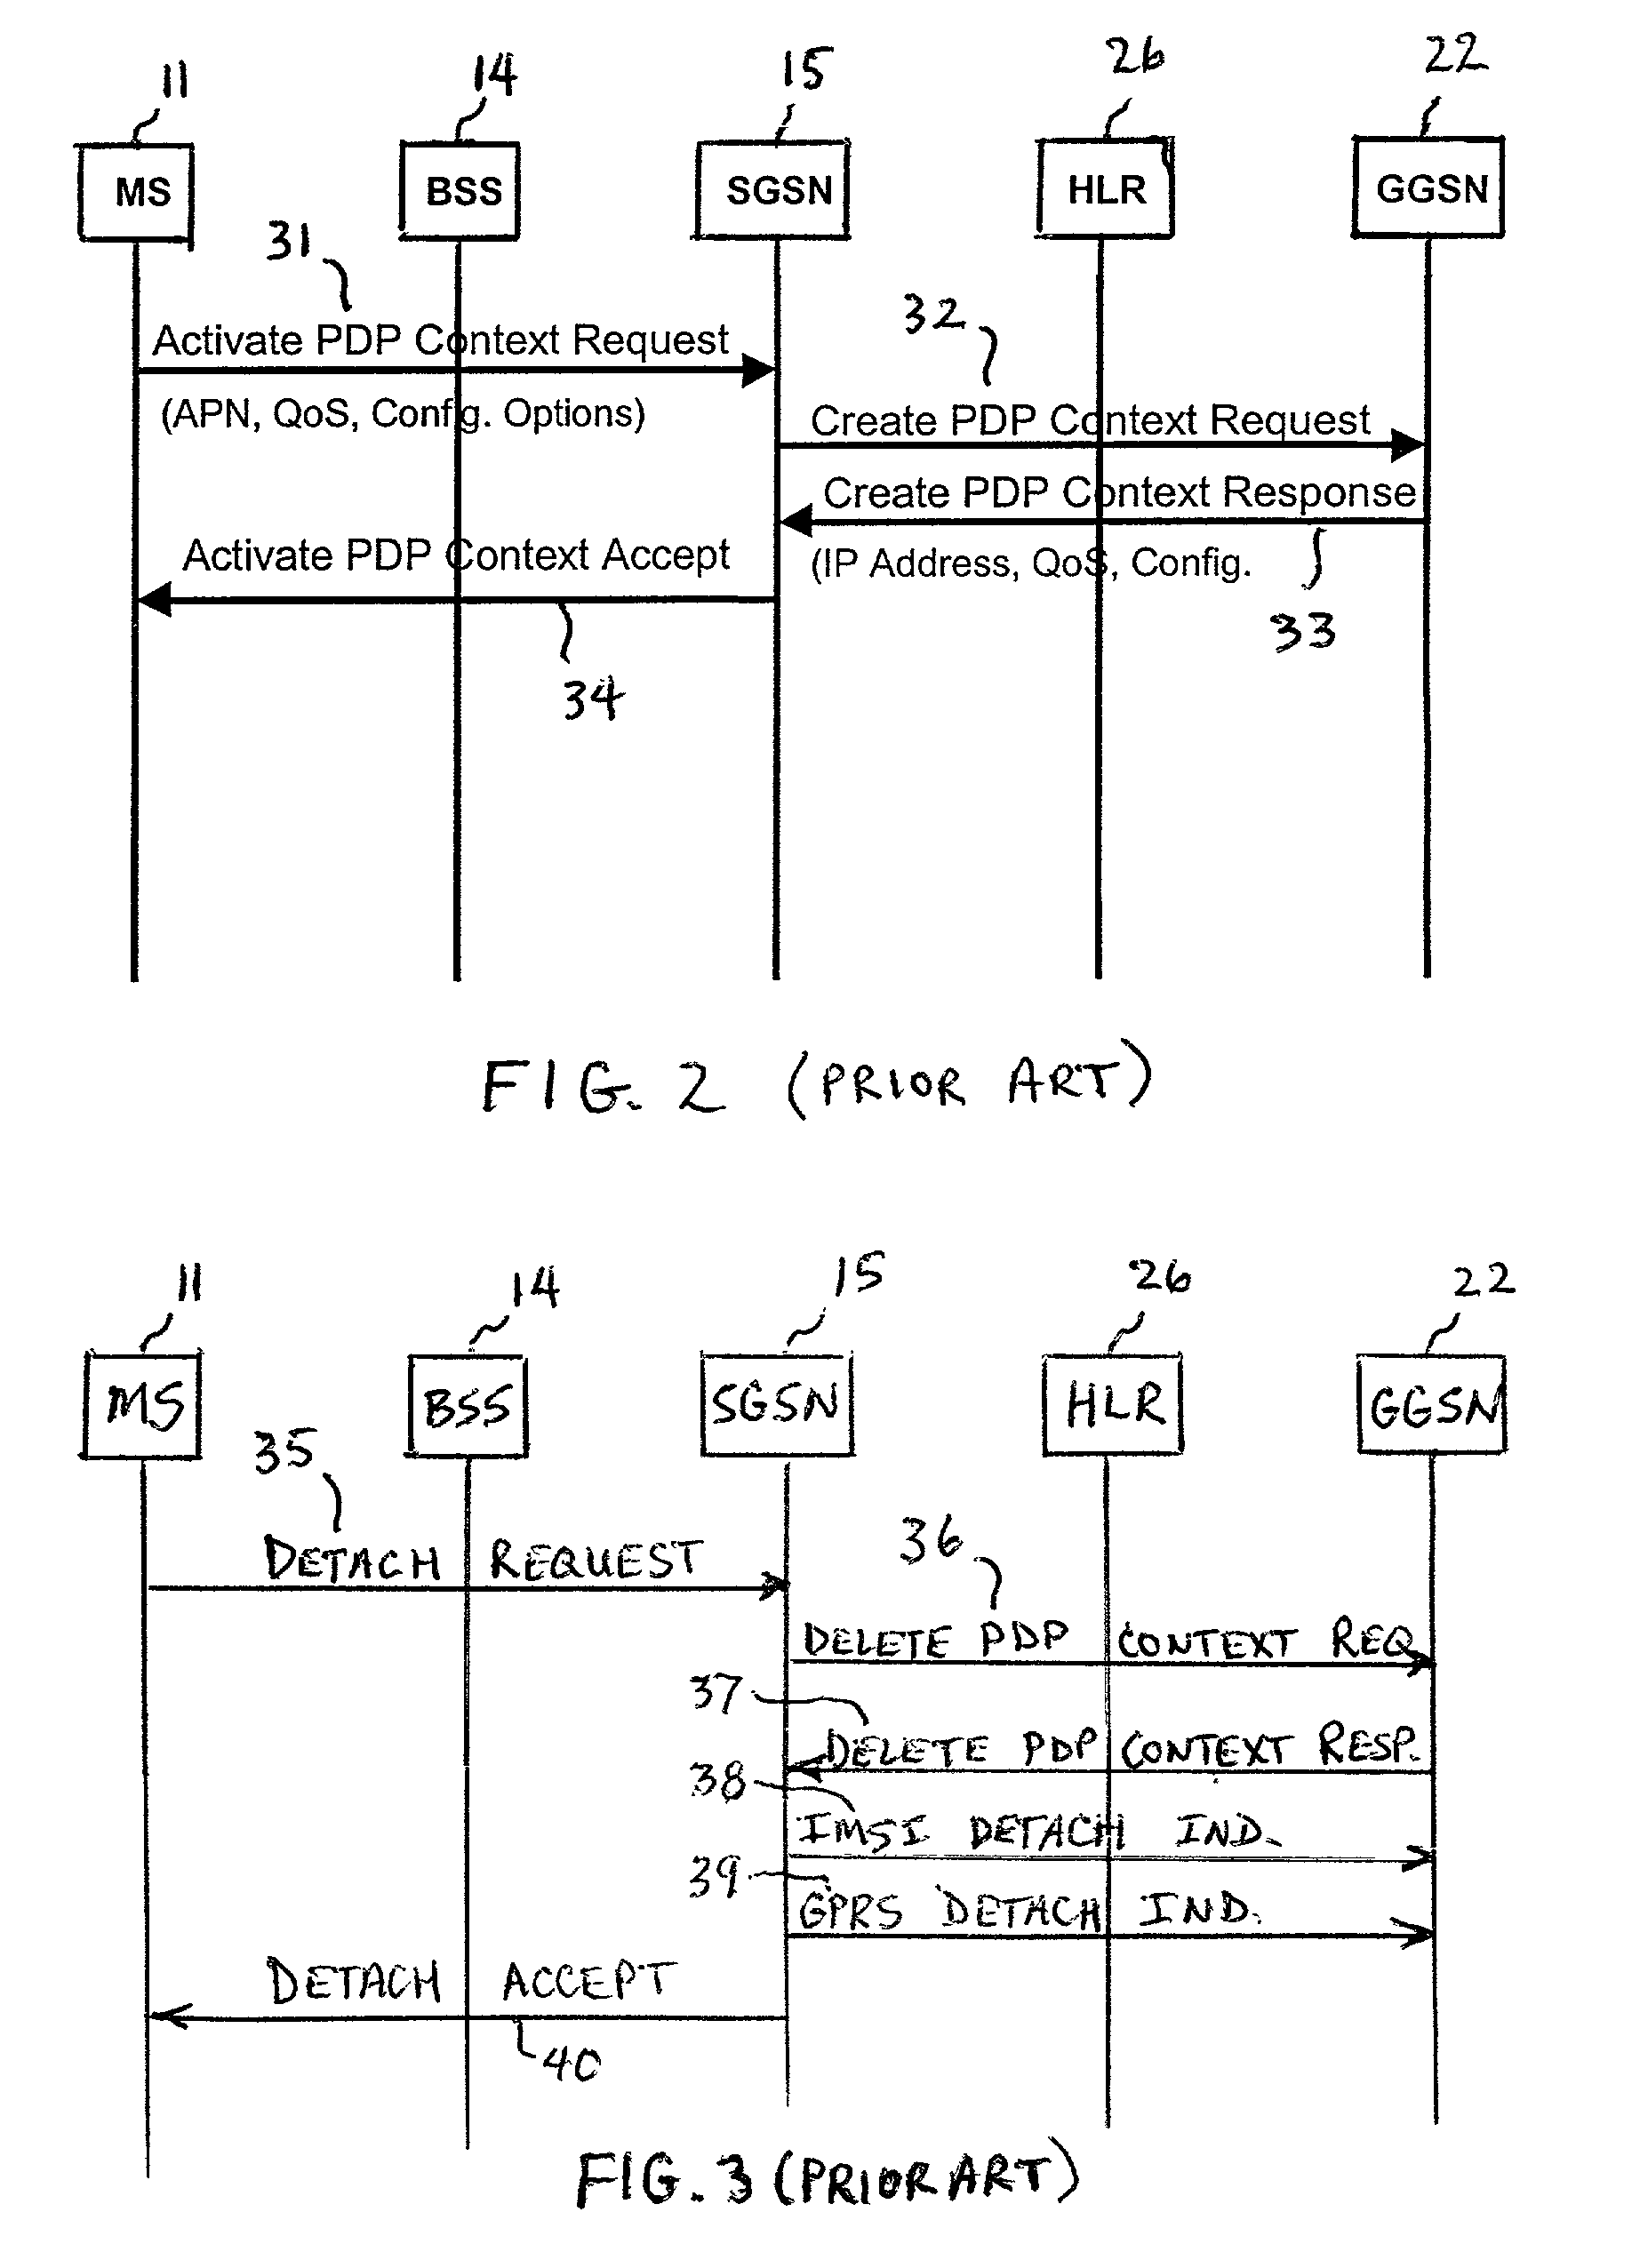 General packet radio service tunneling protocol (GTP) packet filter